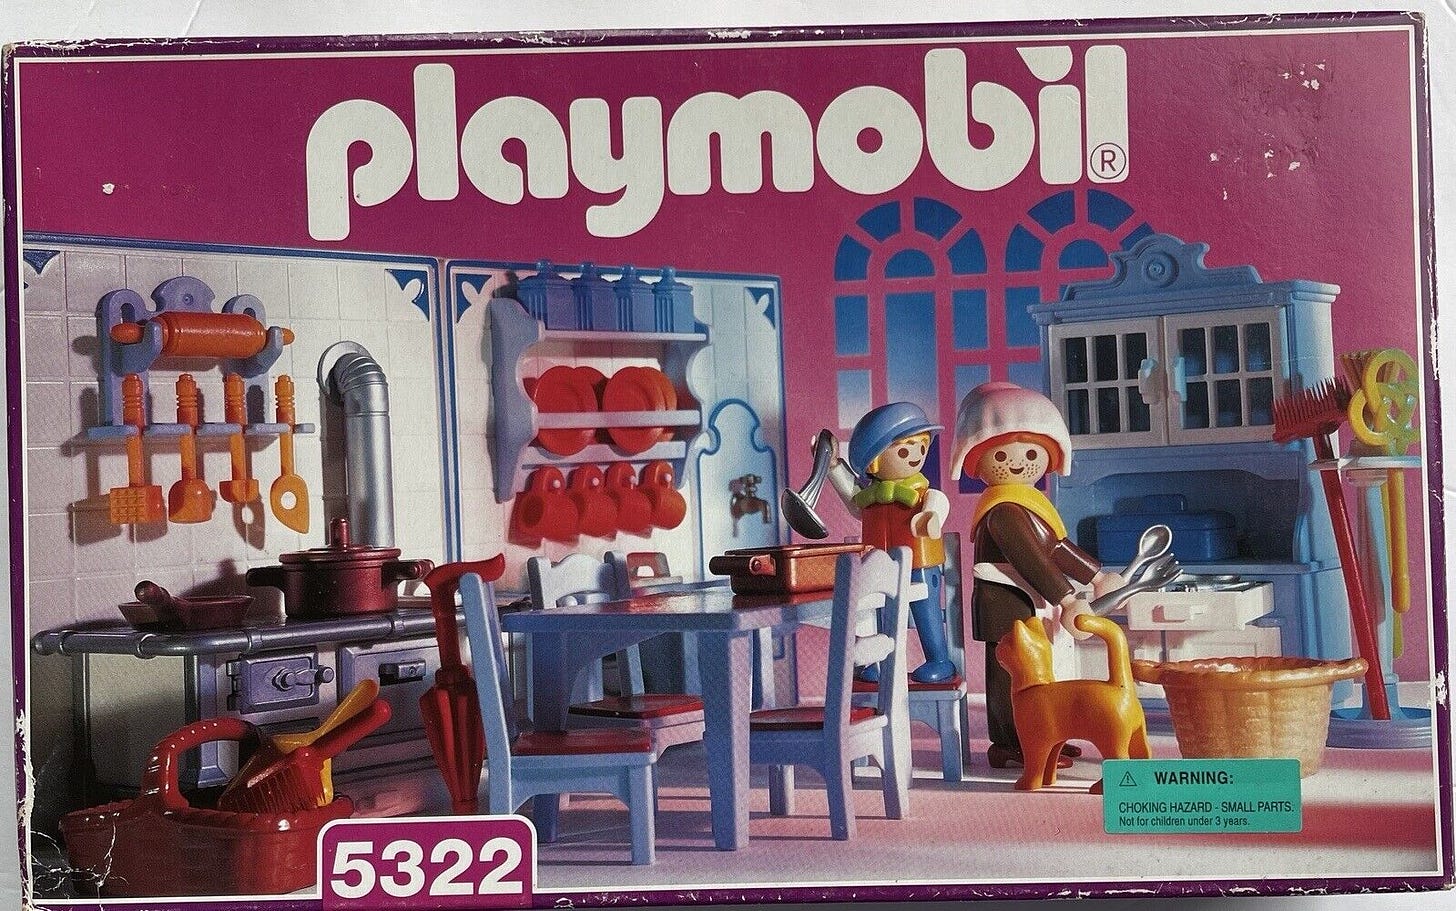 Vintage pink box of Victorian Playmobil kitchen set with blue table and chairs, stove, adult figurine, child figurine, and kitchen accessories. 